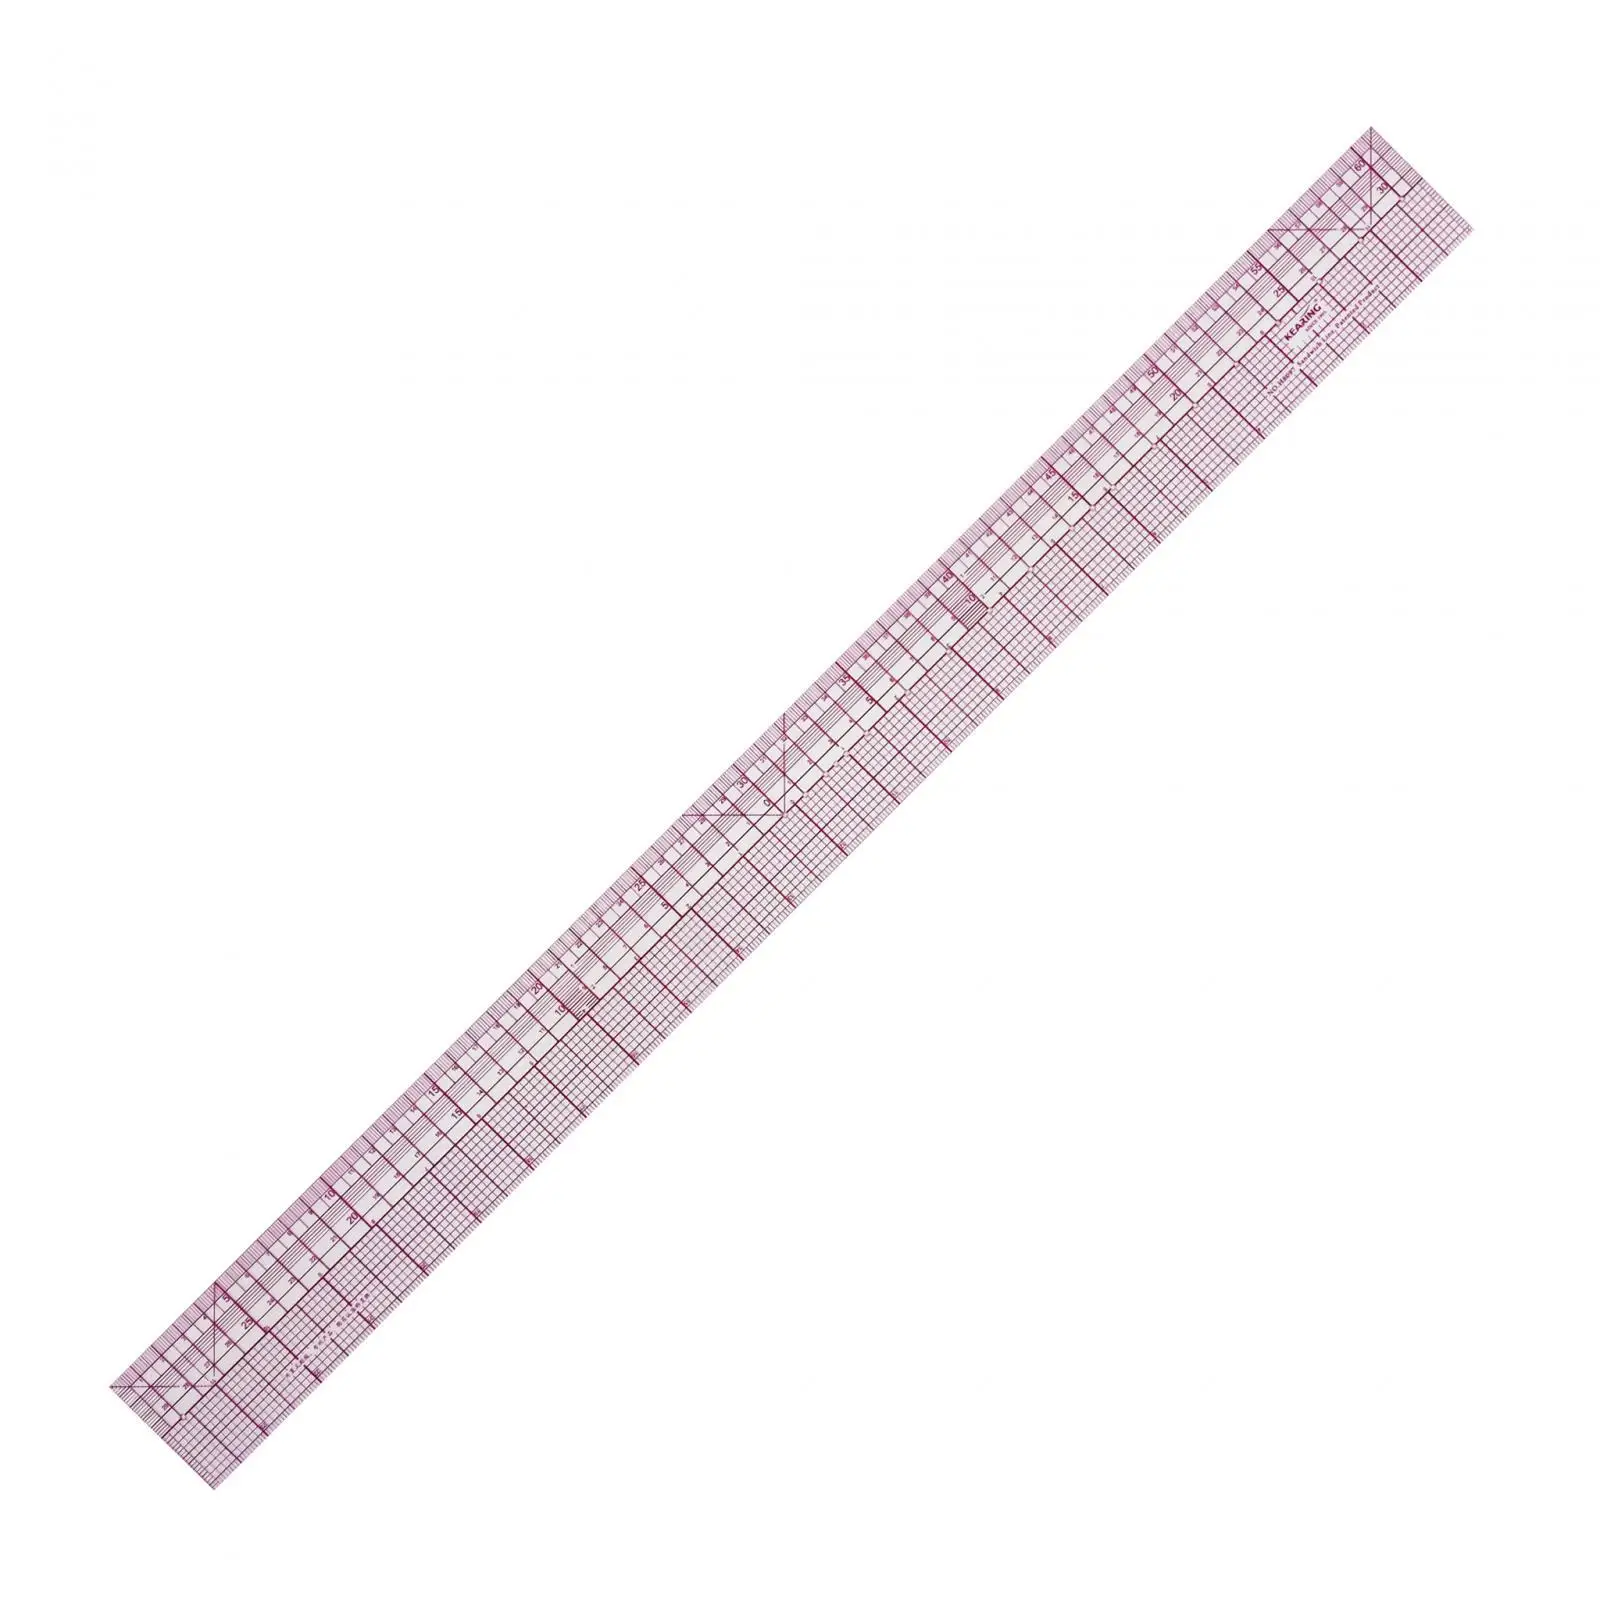 Sewing Cutting Ruler 24inch Acrylic Ruler for Measuring Home Clothing Making Quilting Precision Measurements Sewing Accessories